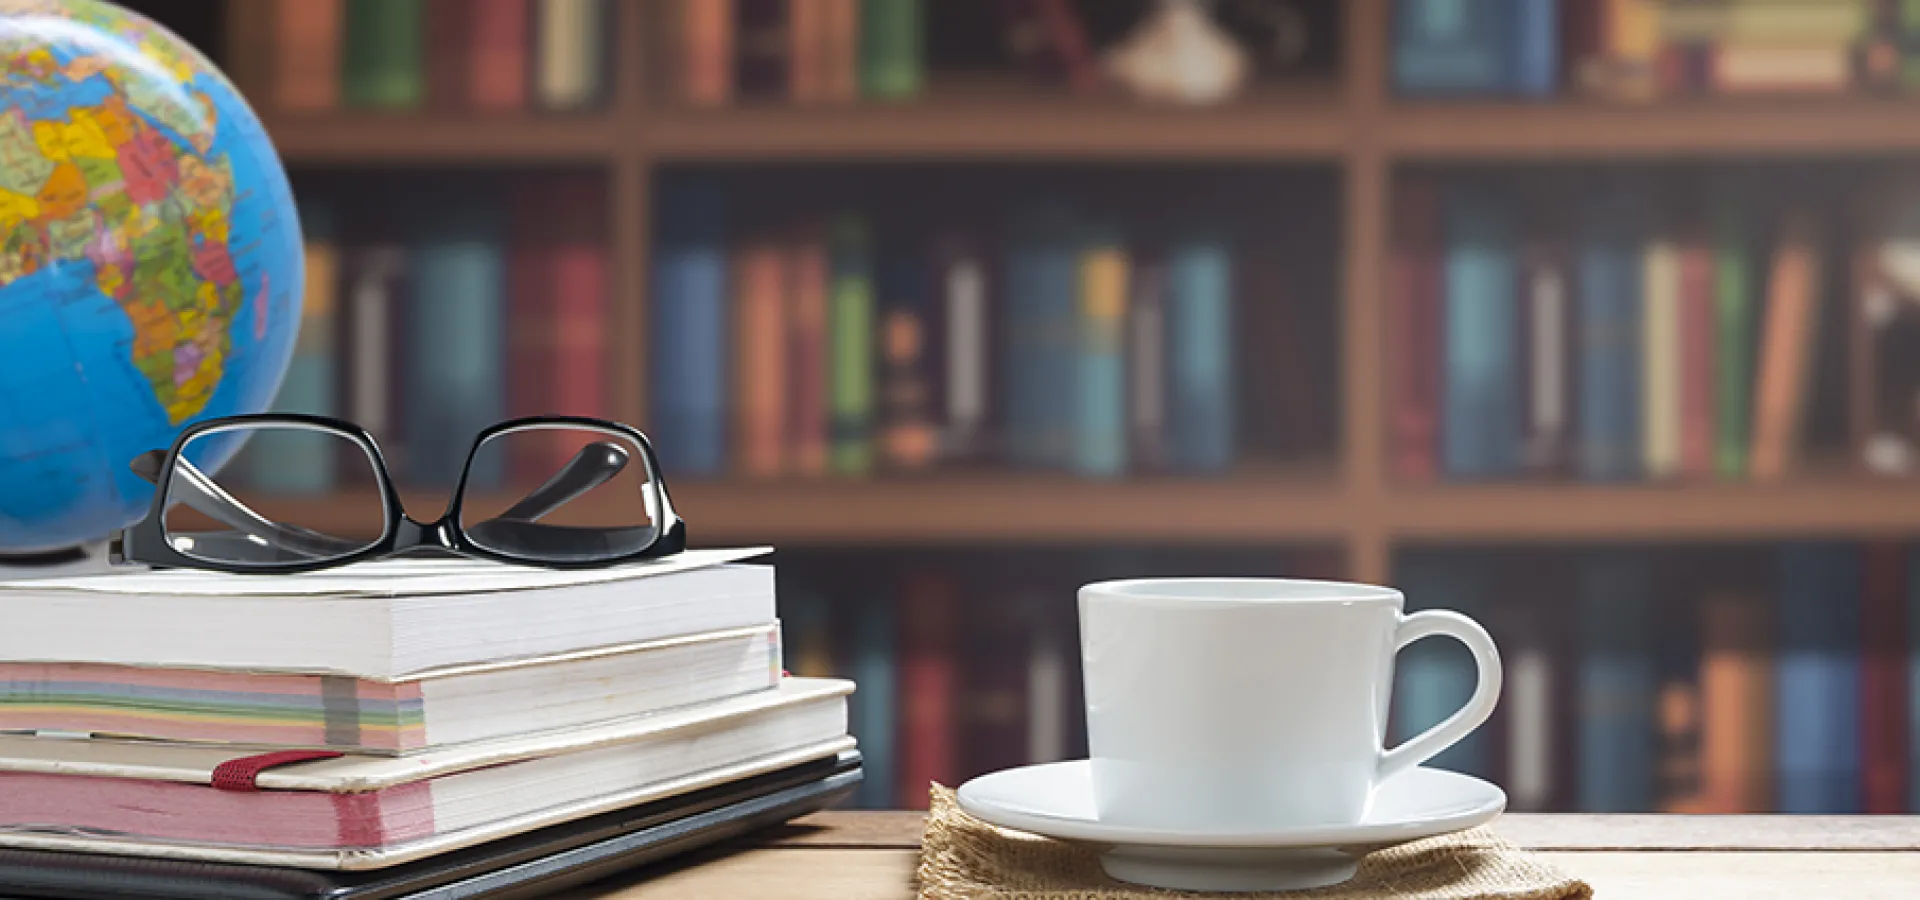 A globe centered on Africa sits on the corner of a desk. A pile of books is topped by a pair of glasses and to one side a saucer with coffee or tea. A vast bookcase covers the wall.